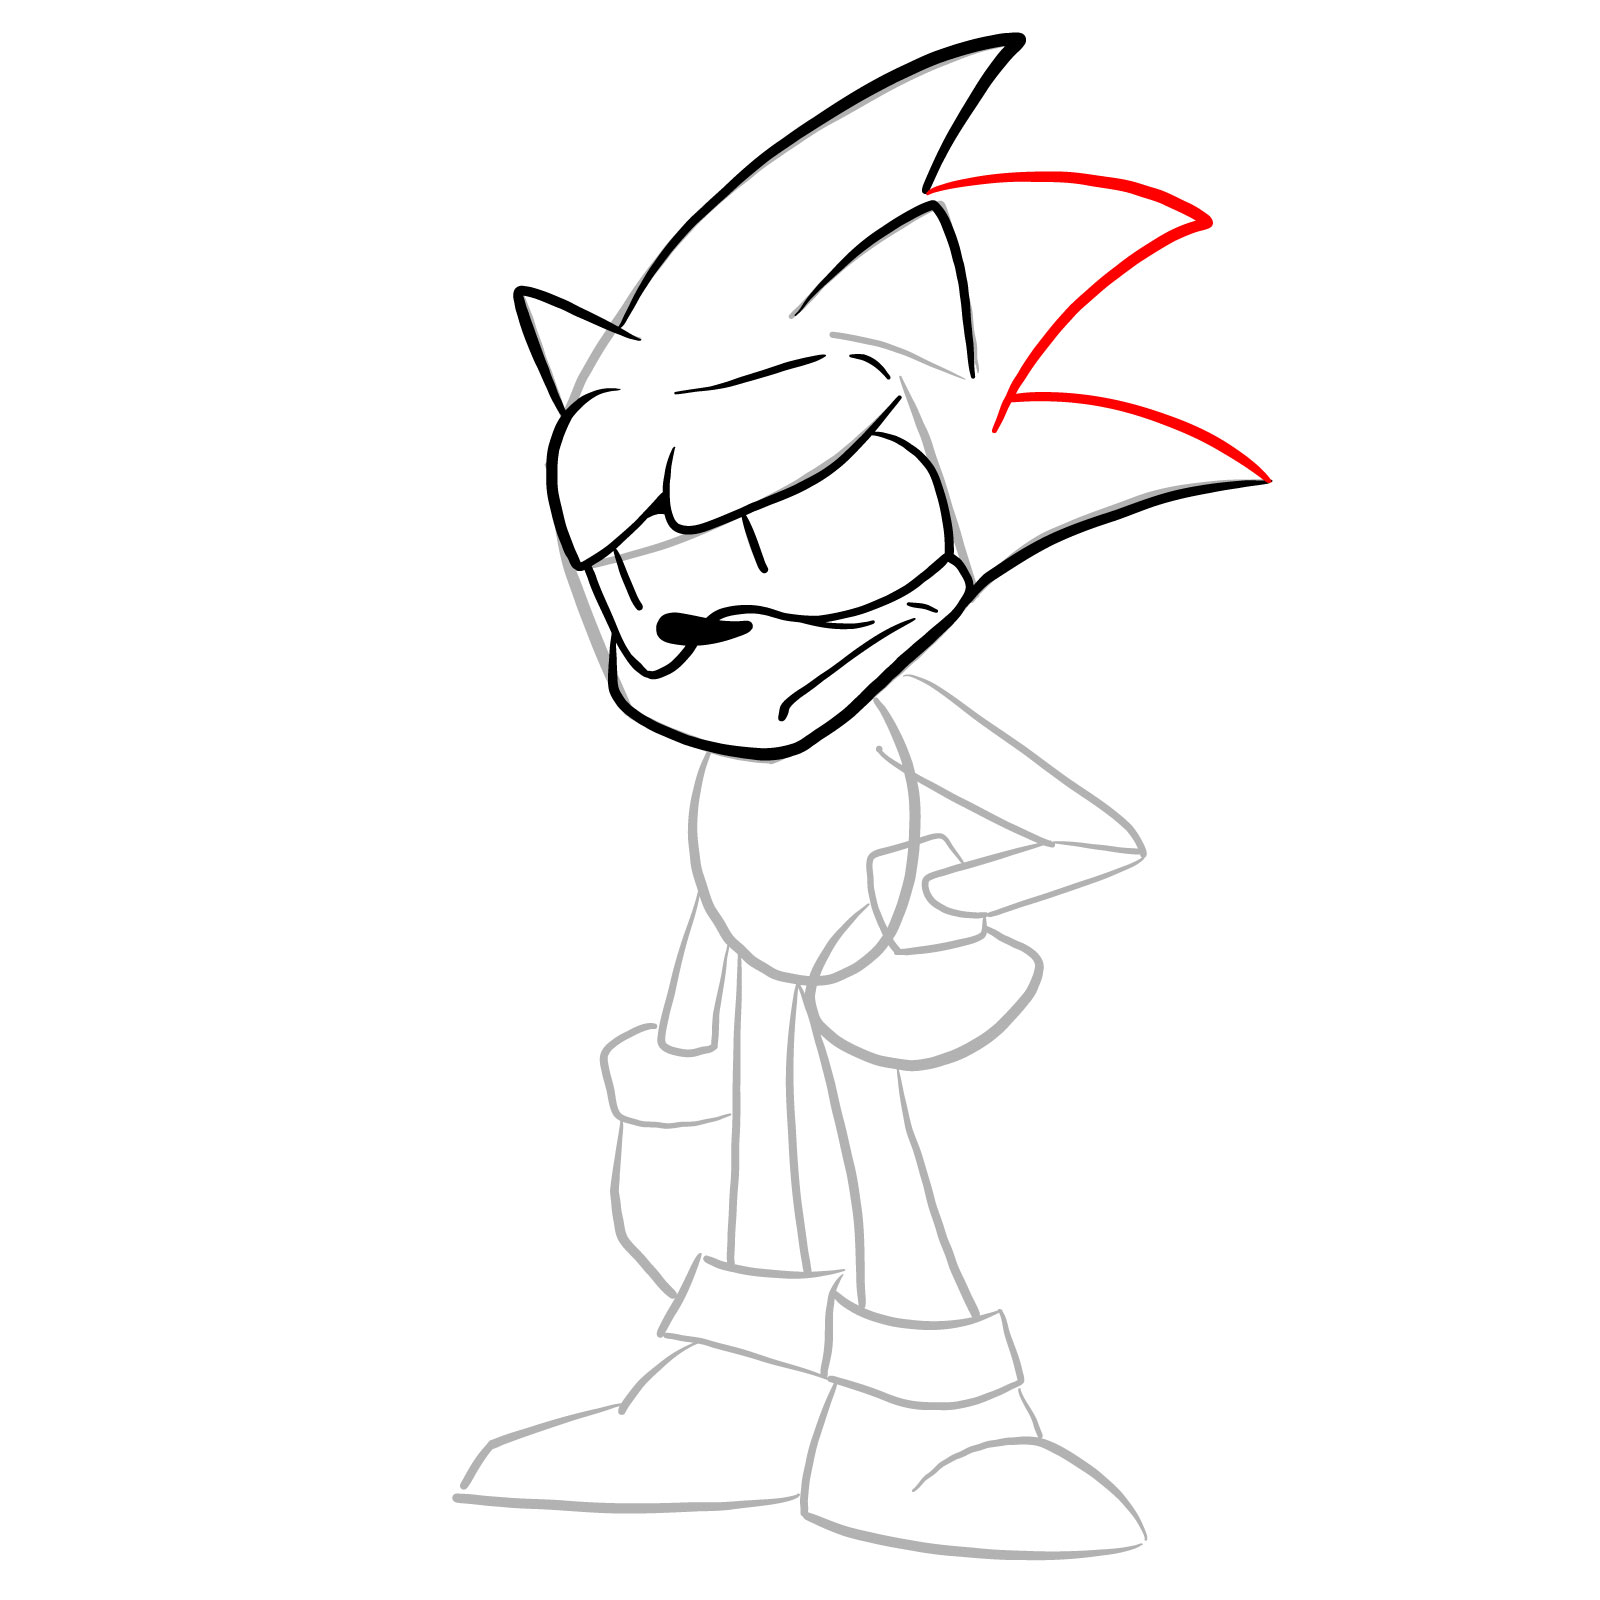 How to draw Sonic - FNF: Secret Histories - step 11